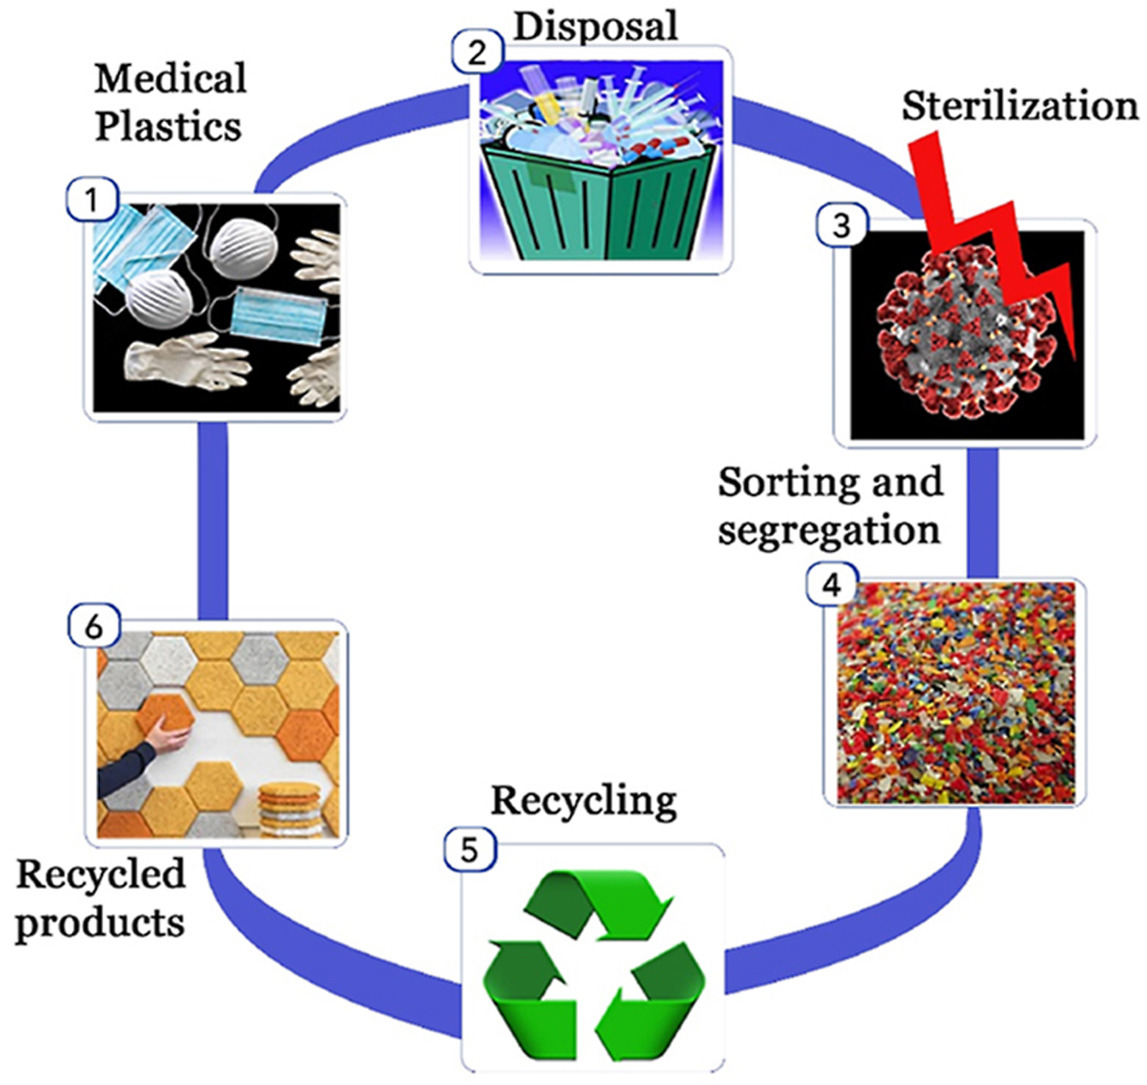 a depiction of Recycling of medical plastics